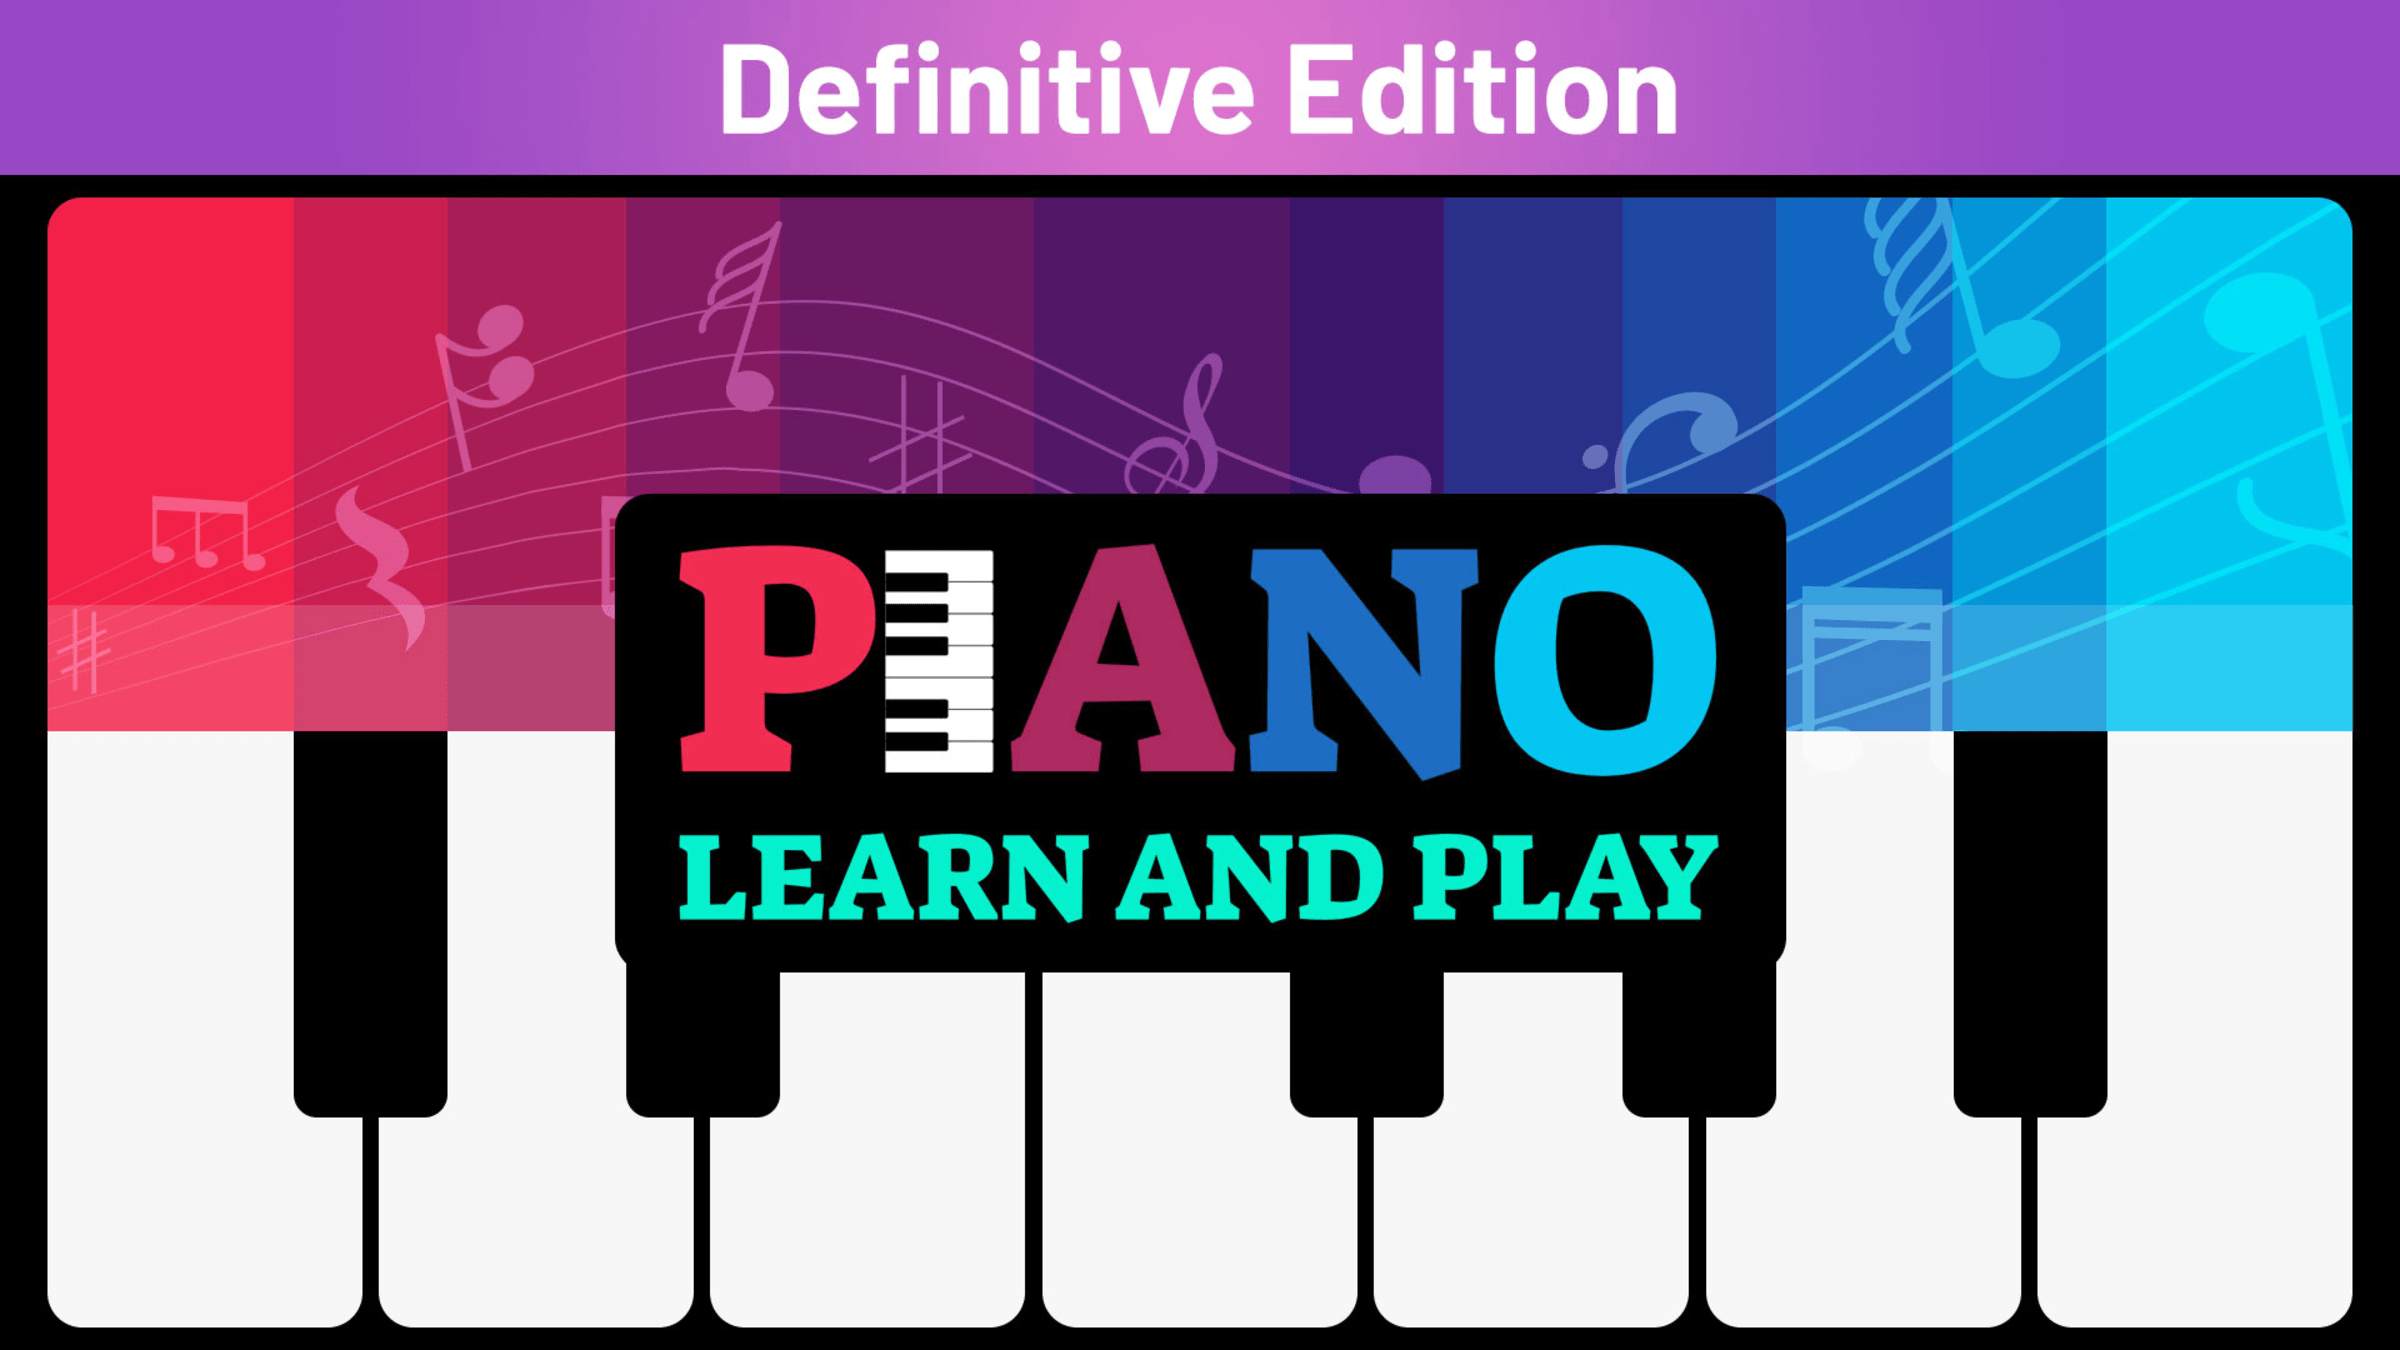 Piano: Learn and Play Definitive Edition for Nintendo Switch - Nintendo  Official Site